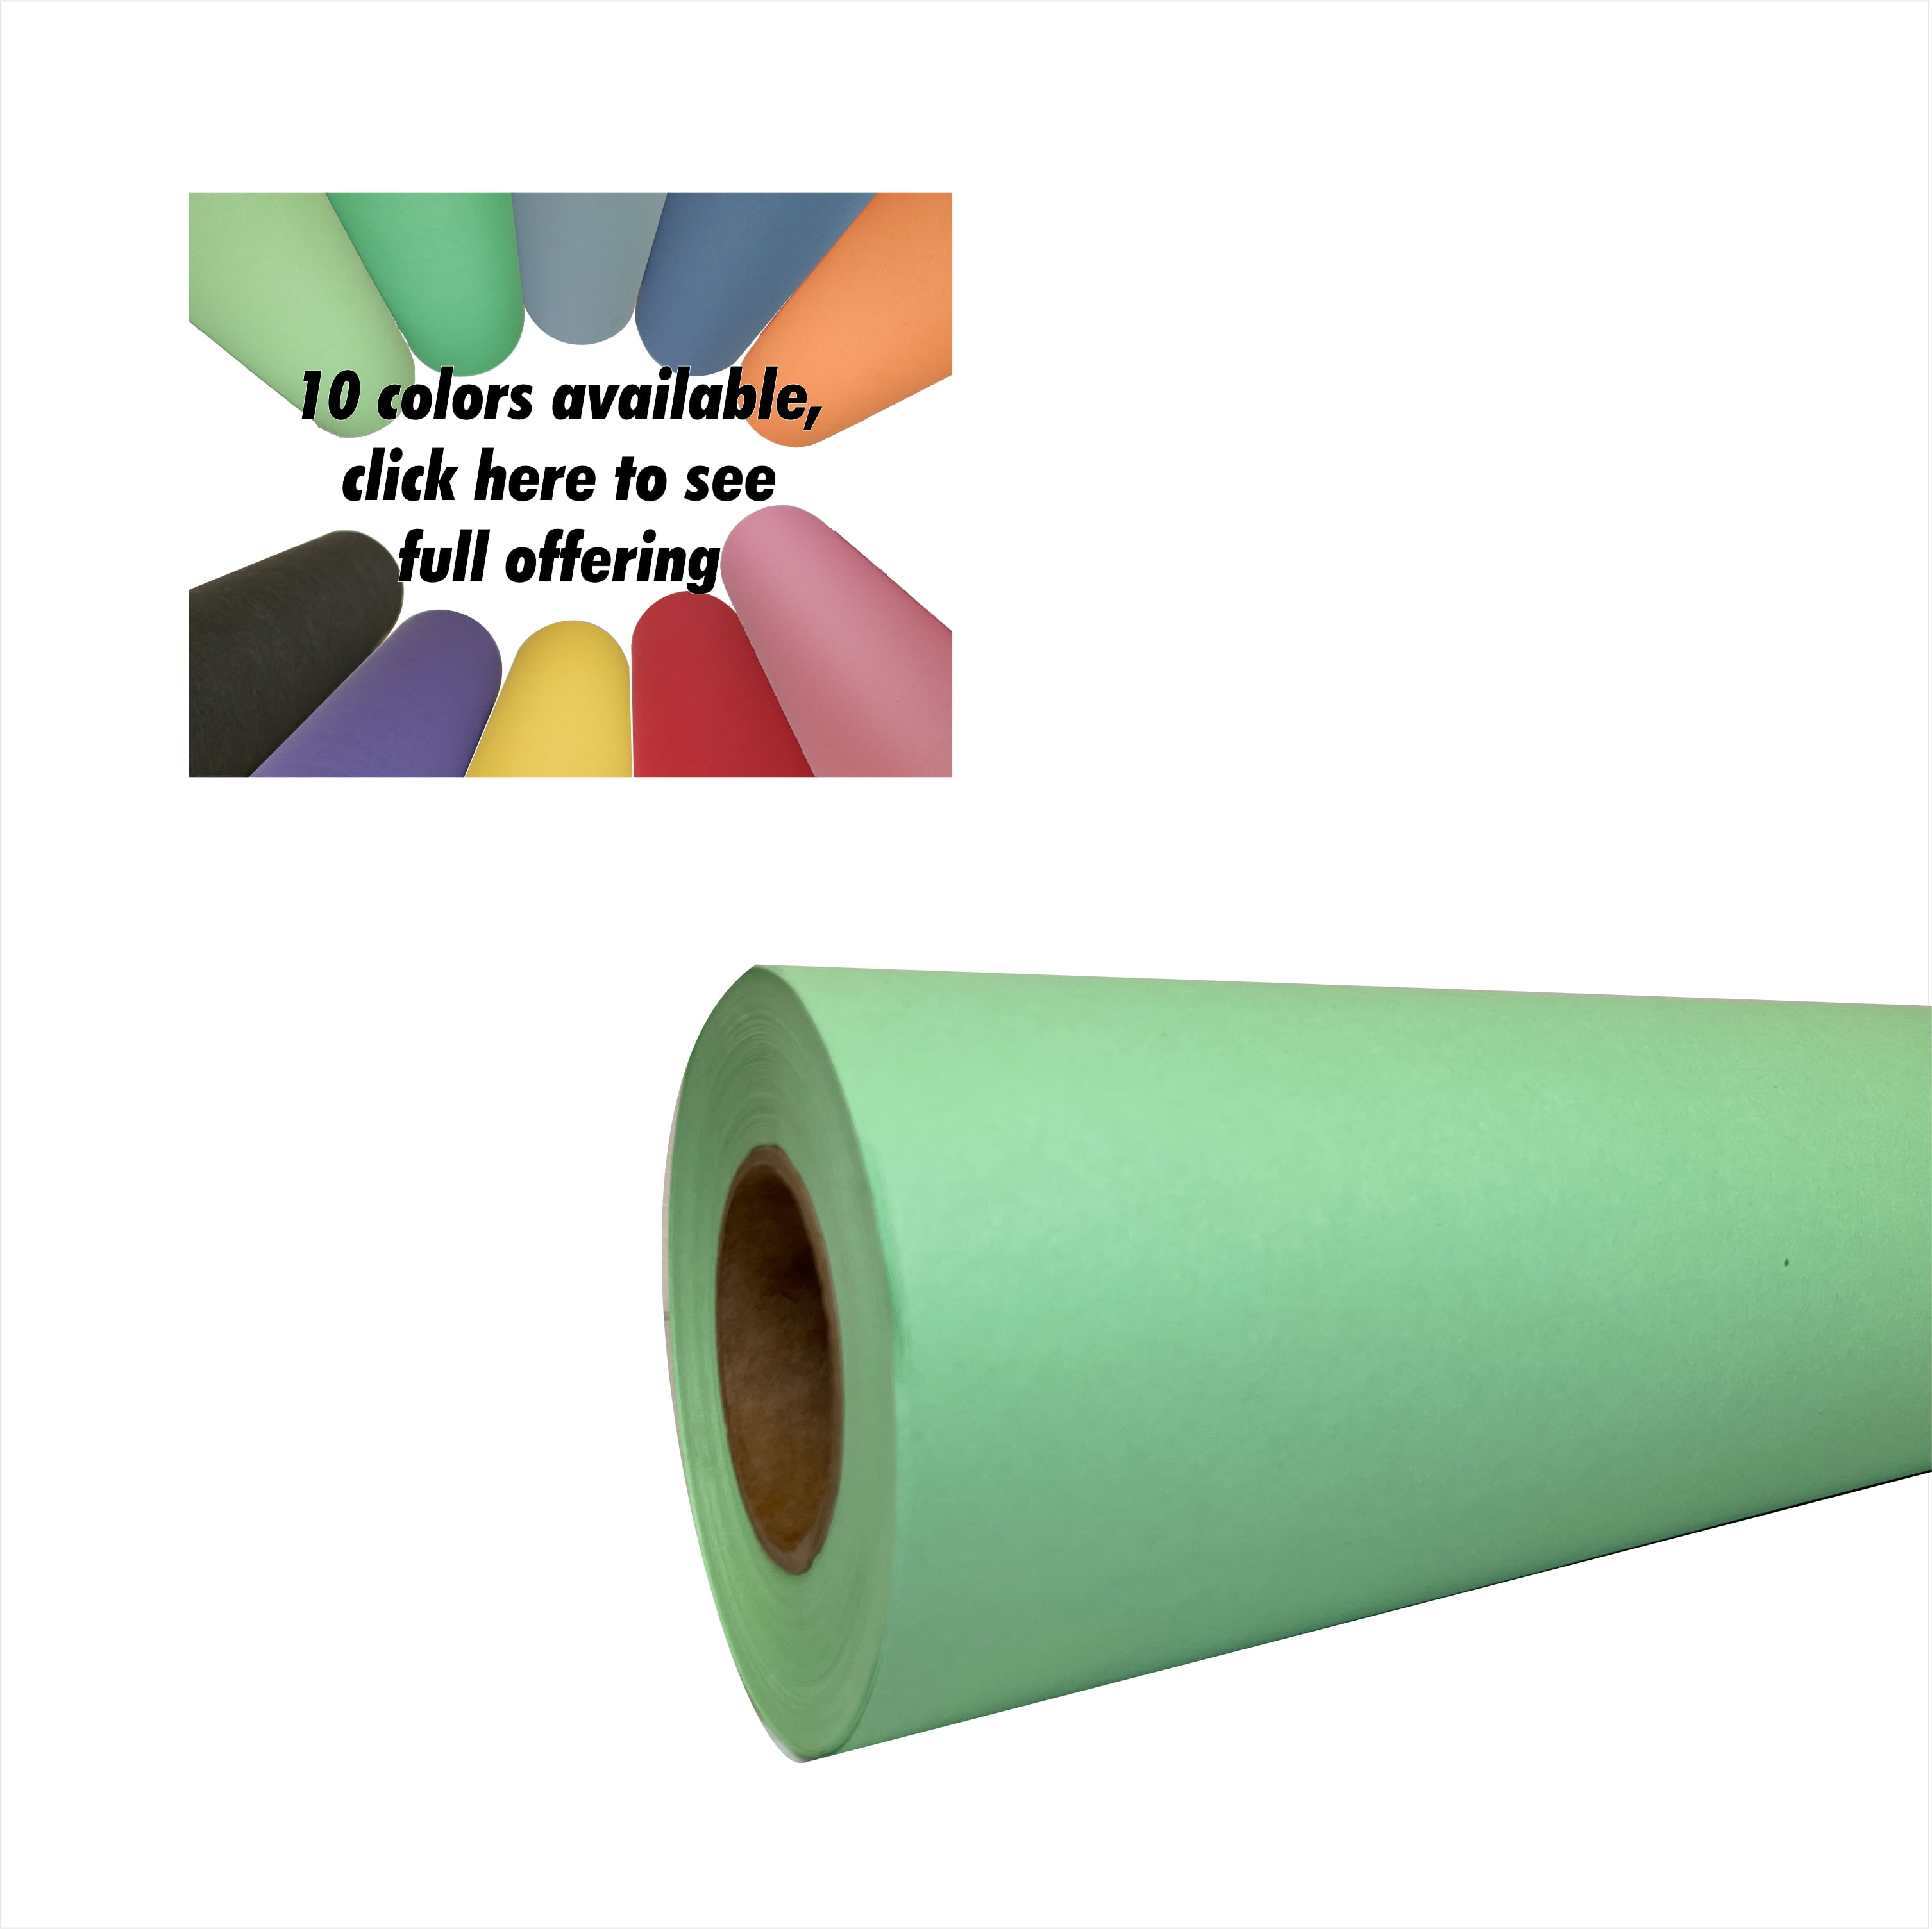 Darice Colored Paper Rolls - Assorted Colors - 24 Pieces